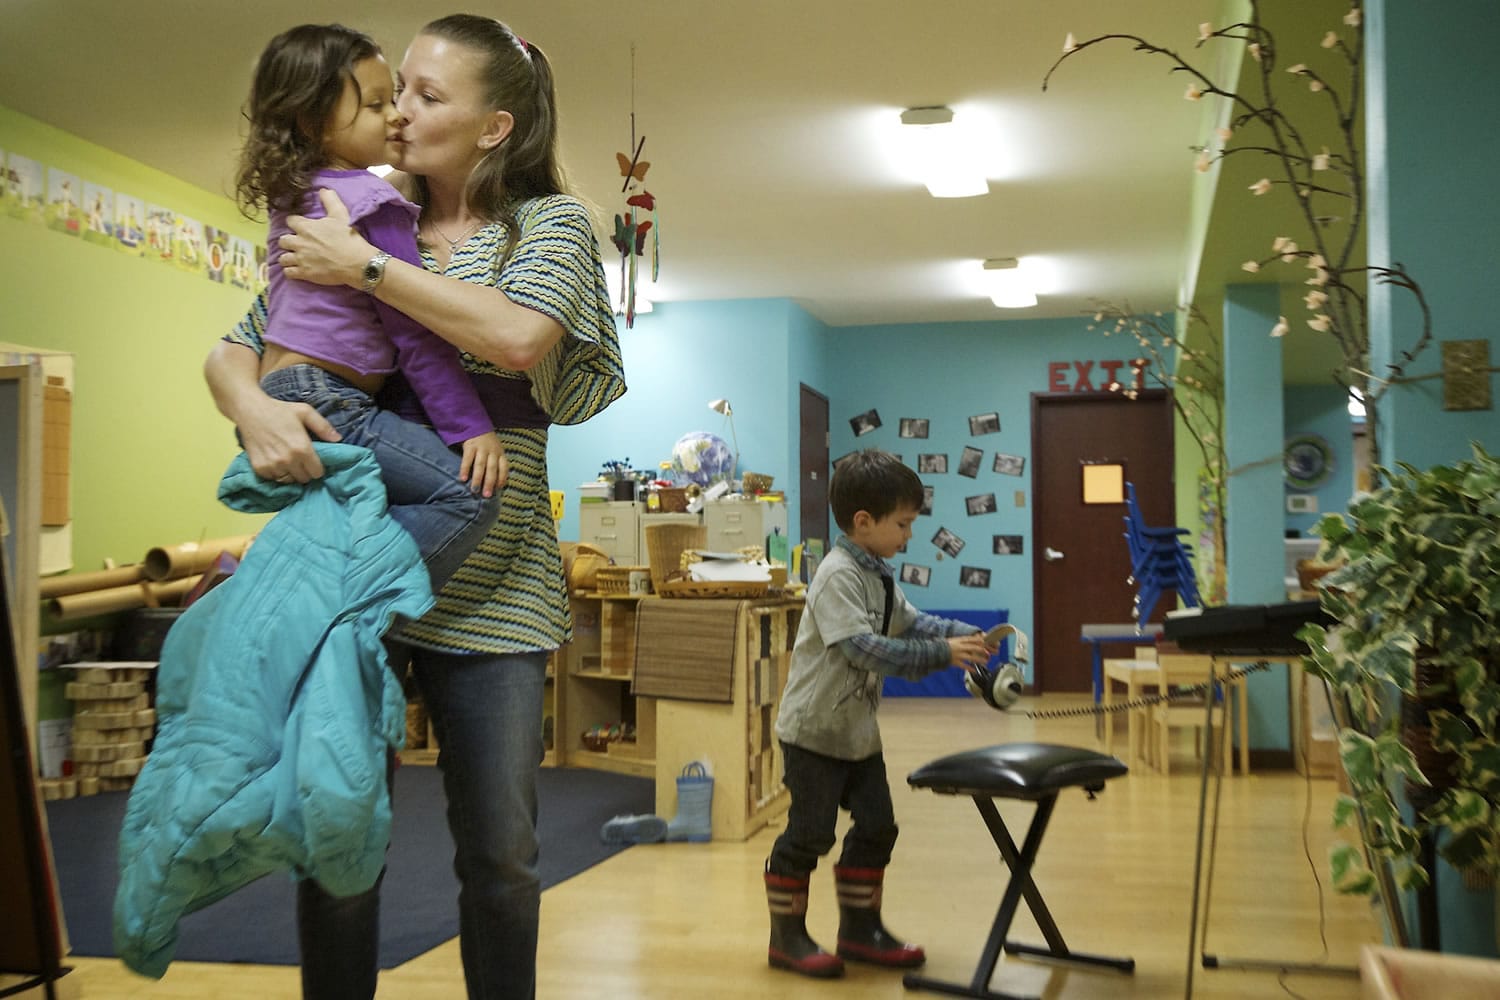 Rachel Collins picks up her daughter, 4-year-old Alexis, at Y's Care, the on-site child care program run by the YWCA Clark County. Y's care is affordable to low-income families and allows single moms, such as Collins, to work.